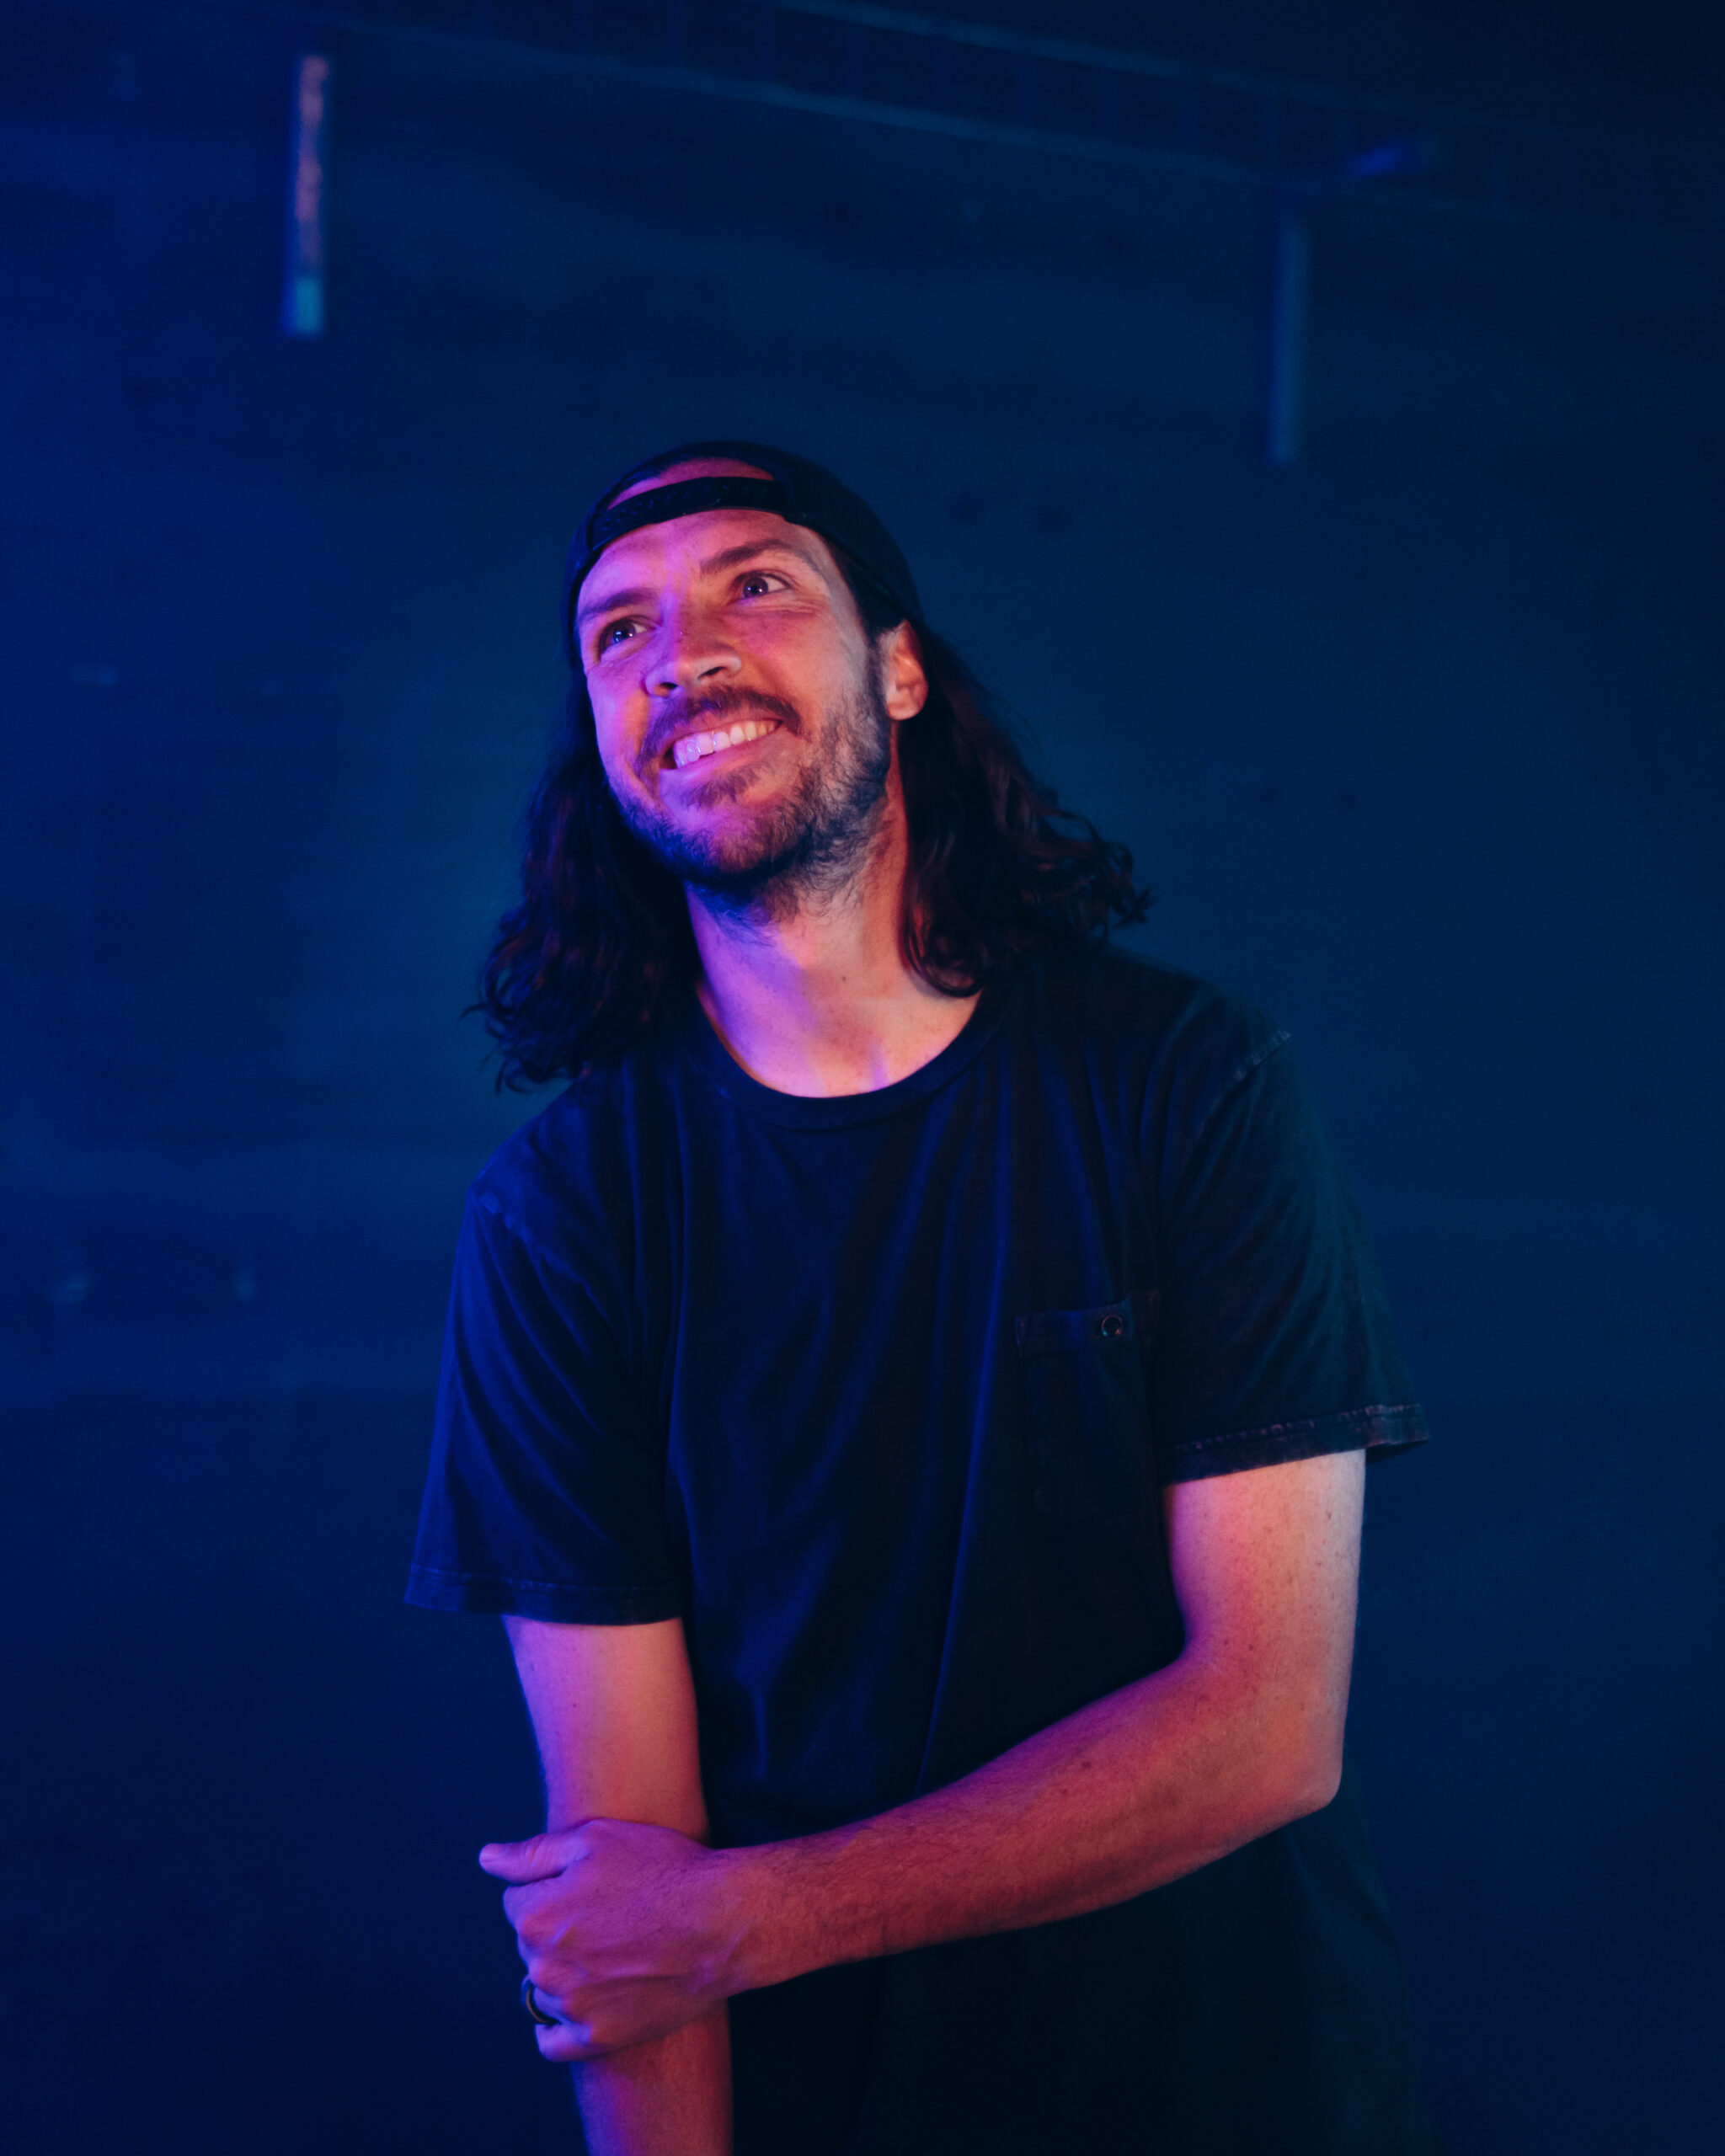 In this edition of the Founder Series, Shaun McBride, aka "Shonduras" shares how he helped co-found The Spacestation.